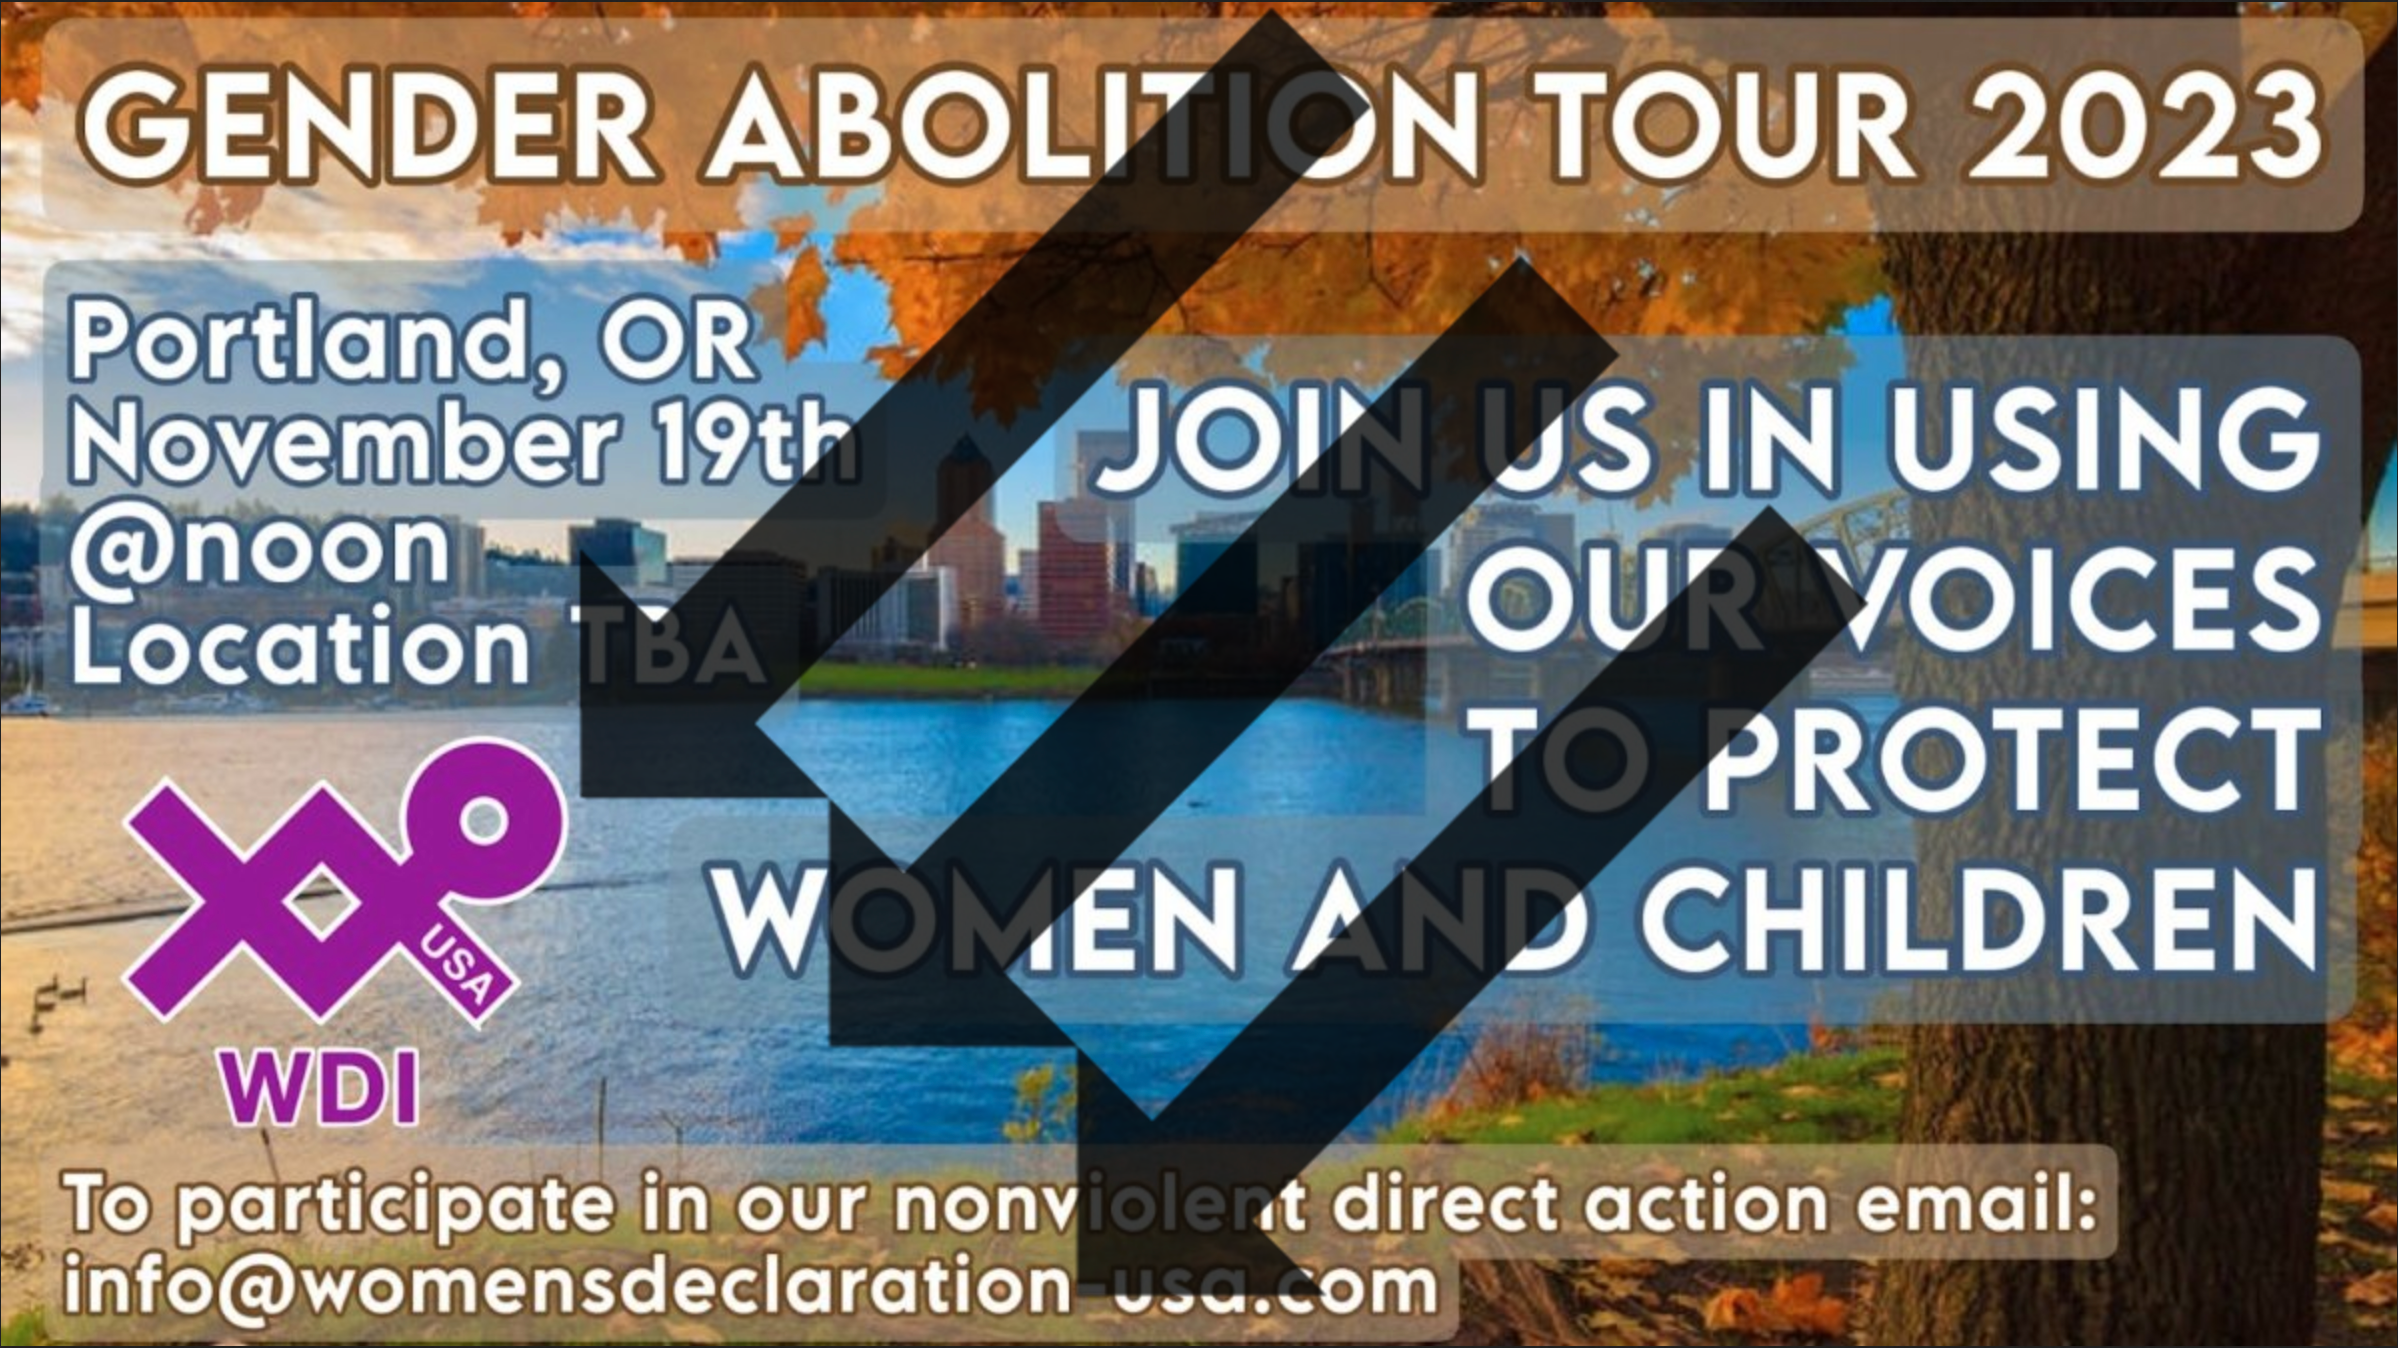 The flyer for the WDI-USA Portland event. Text says 'Gender Abolition Tour 2023. Portland Oregon November 19th. Noon. Location TBA. Join us in using our voices to protect women and children. To participate in our nonviolent direct action email info@womensdeclaration-usa.com' The image is defaced with three arrows over it.